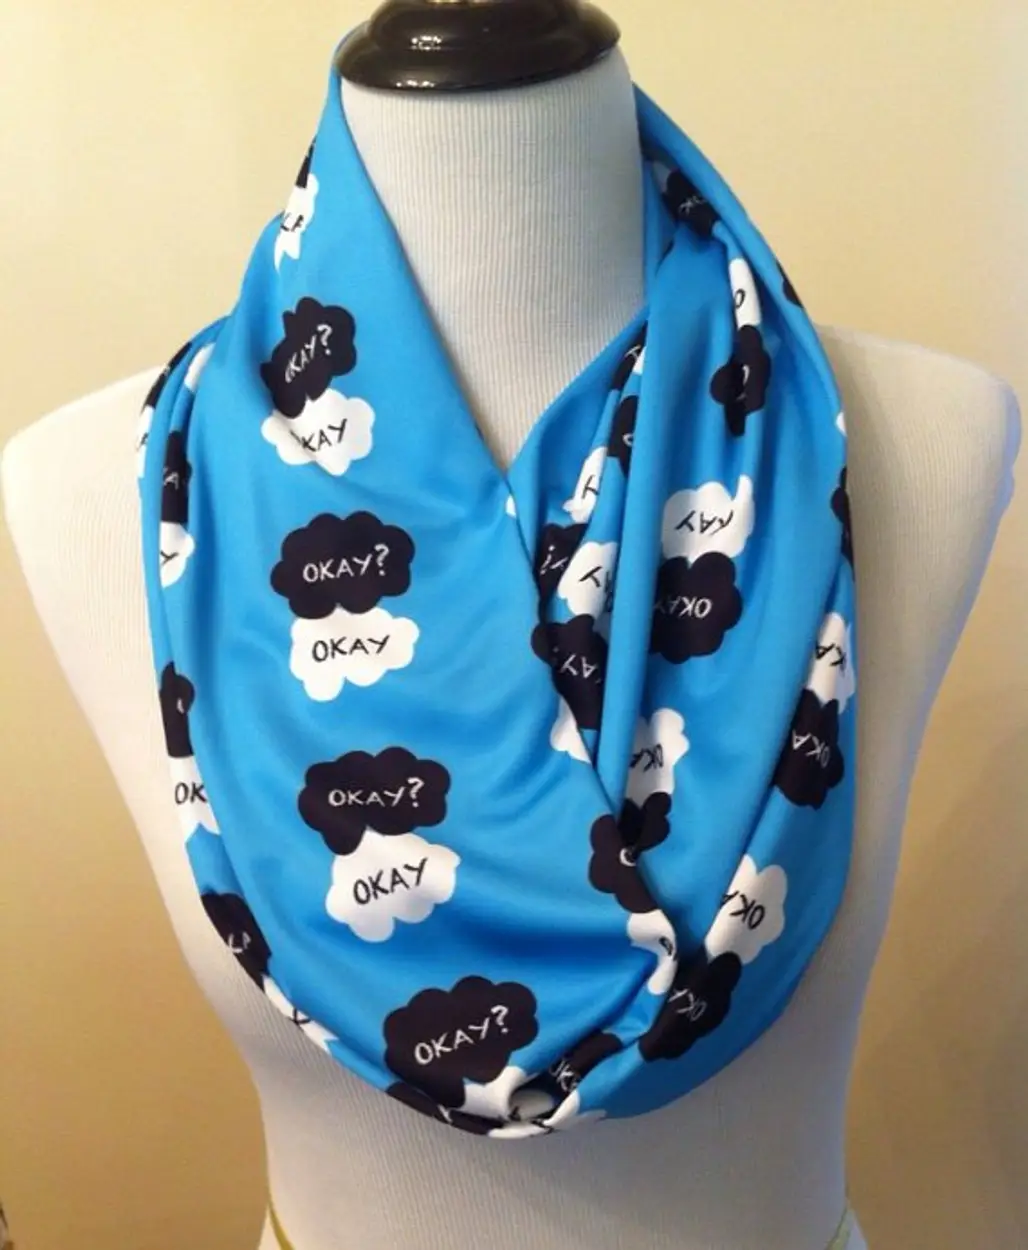 The Fault in Our Stars Inspired Infinity Scarf